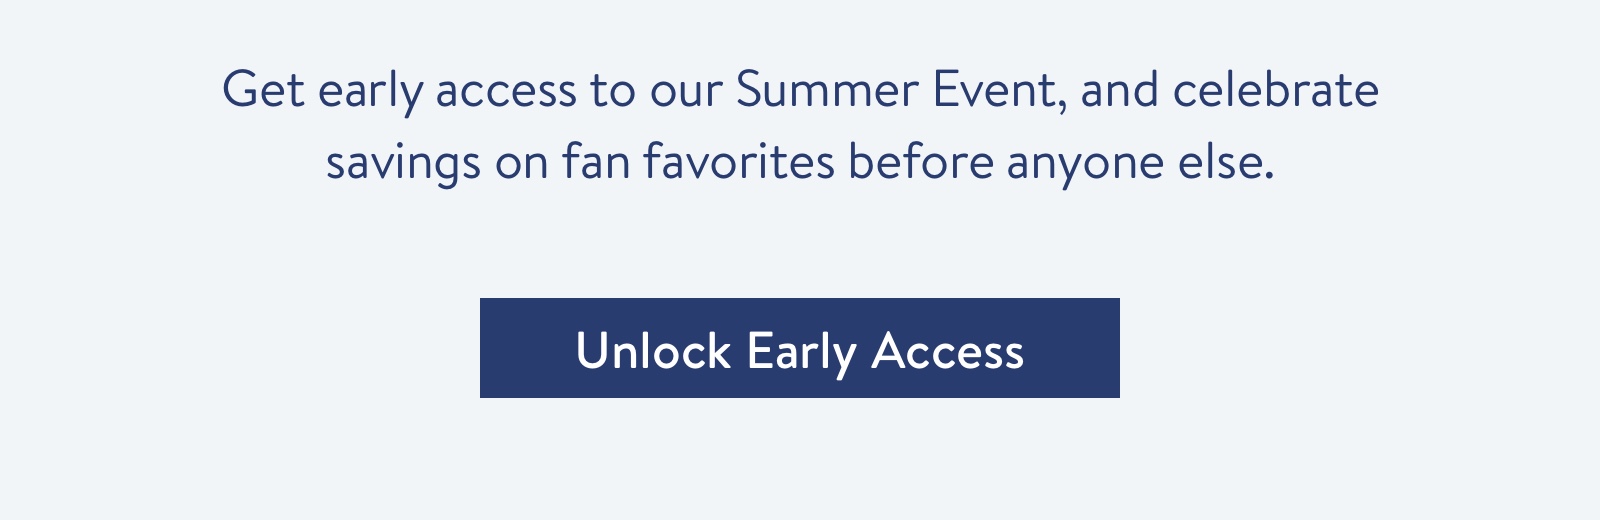 Get early access to our Summer Event, and celebrate savings on fan favorites before anyone else.